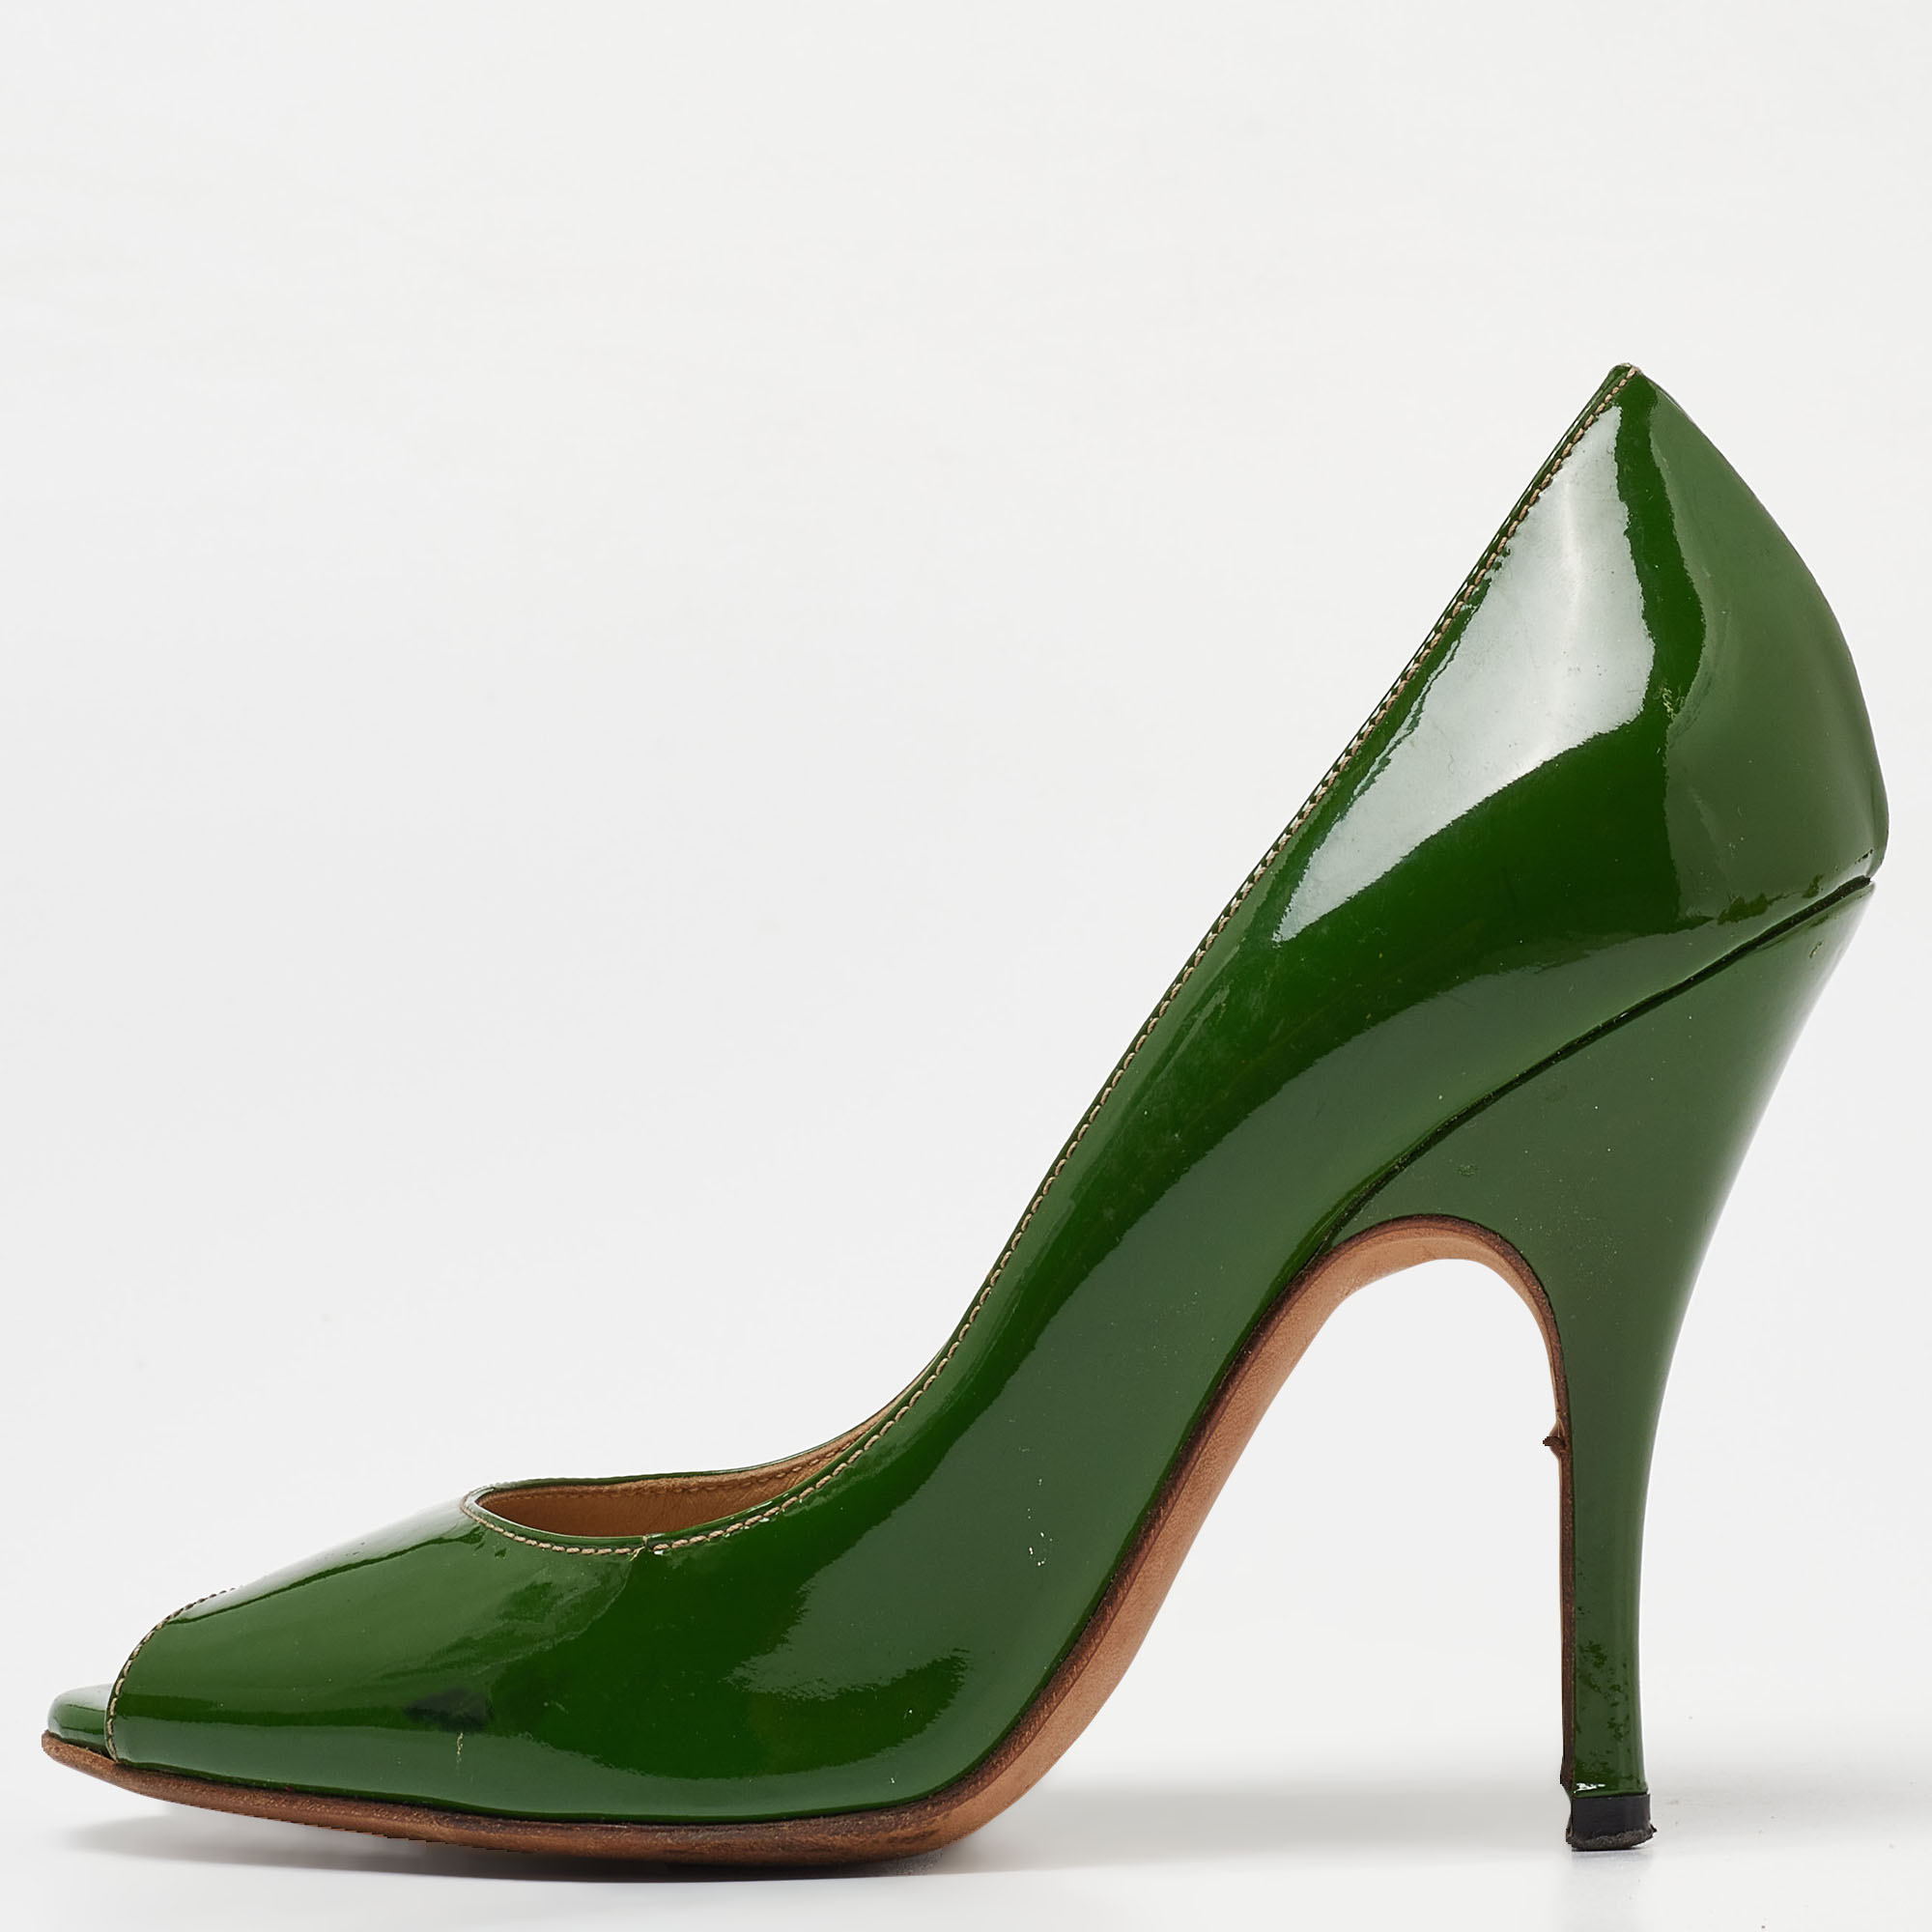 D&g green patent leather peep toe pumps size 38